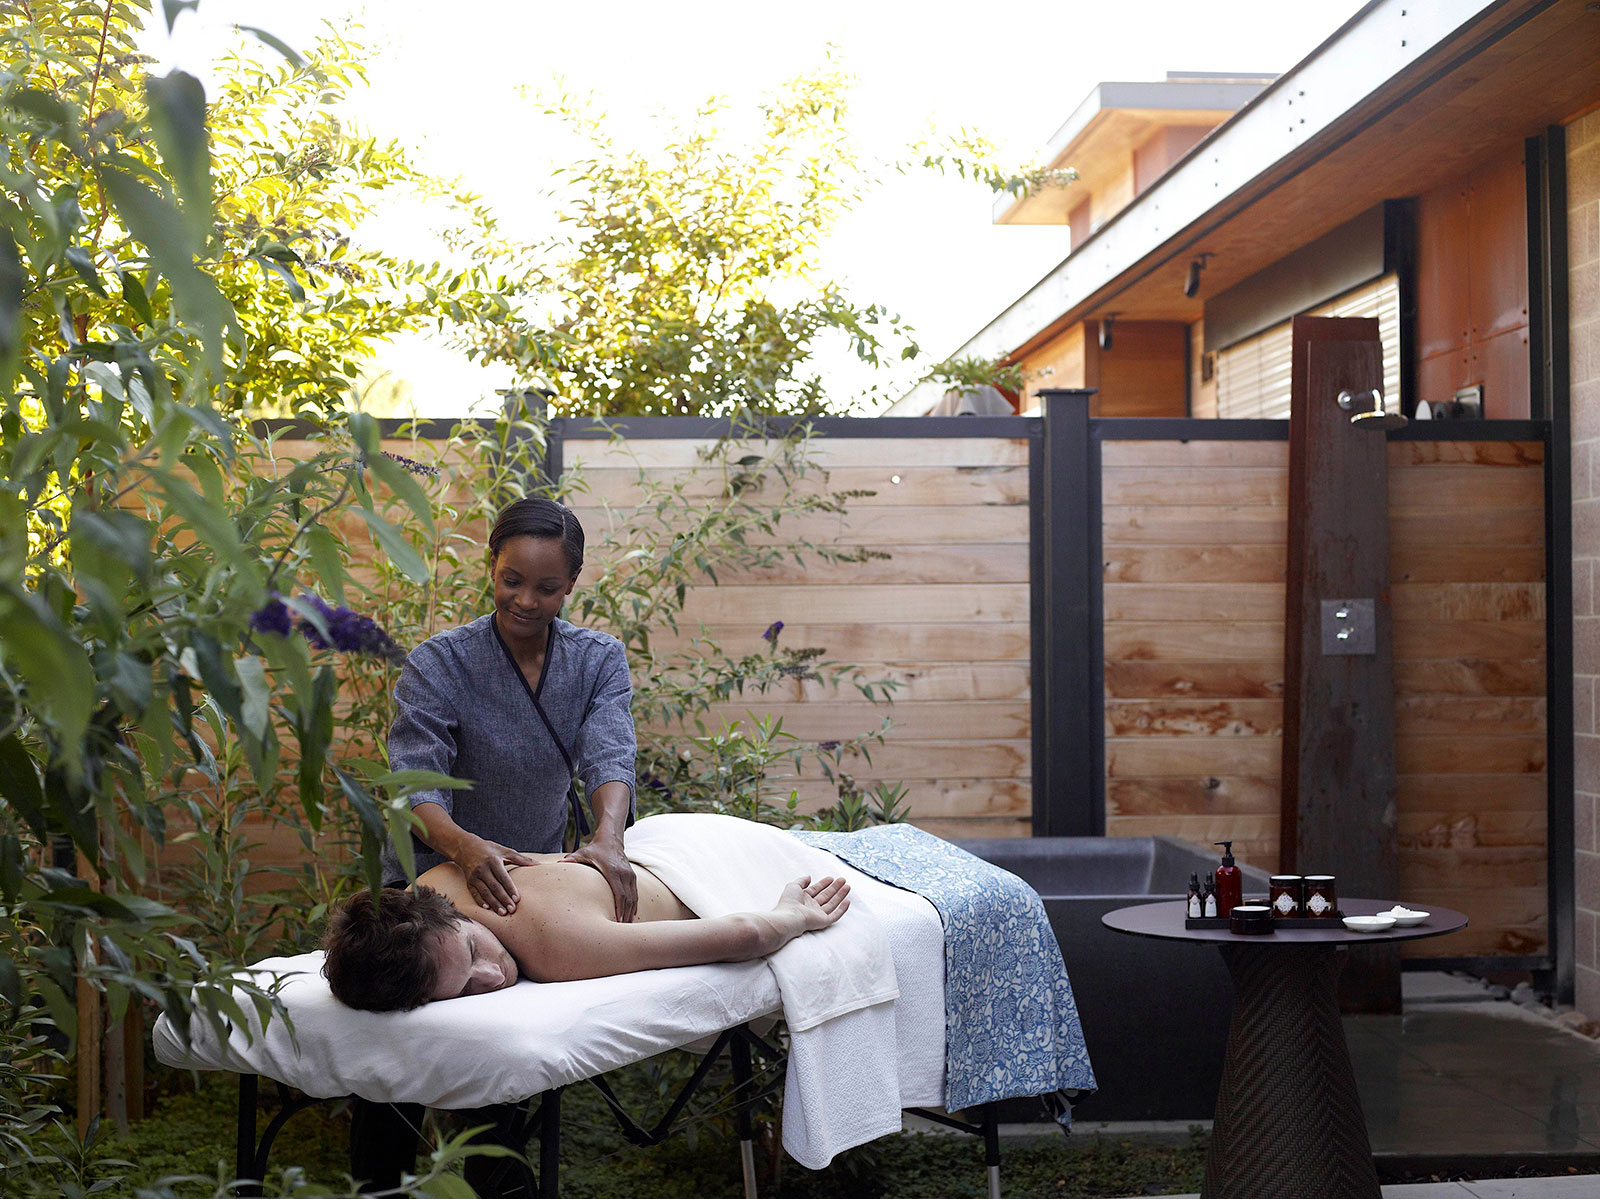 Outdoor Massage at our Spa Resort in Yountville, CA